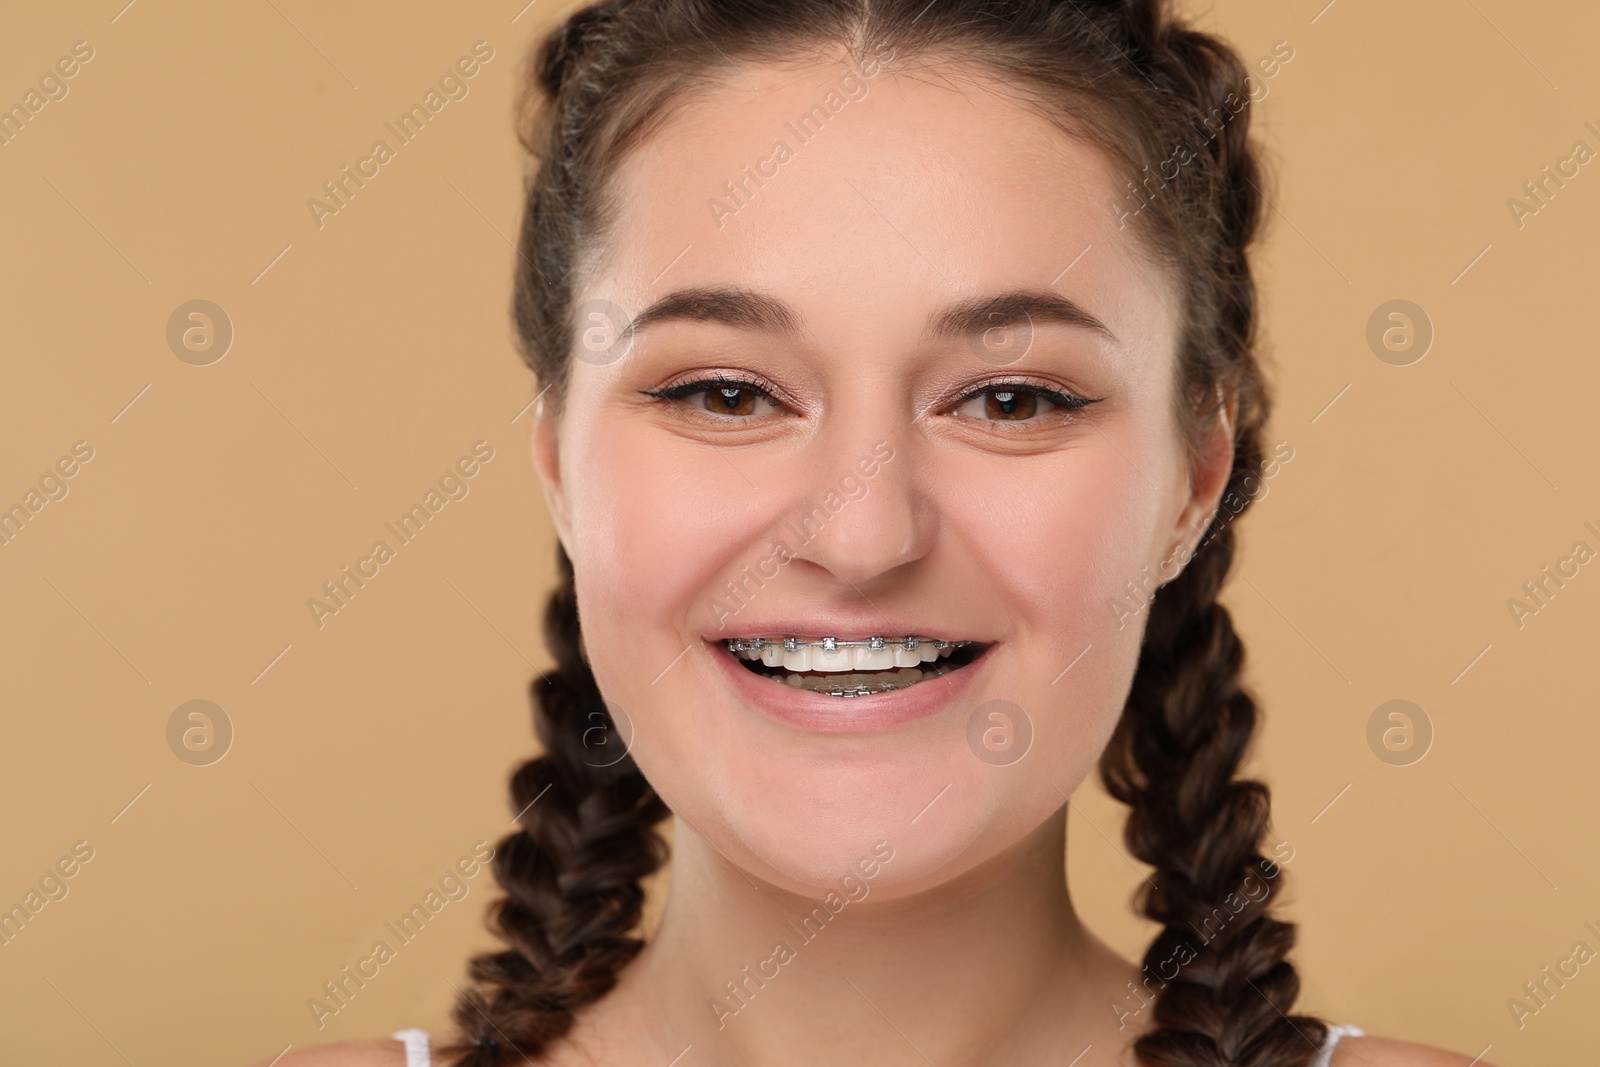 Photo of Smiling woman with dental braces on brown background